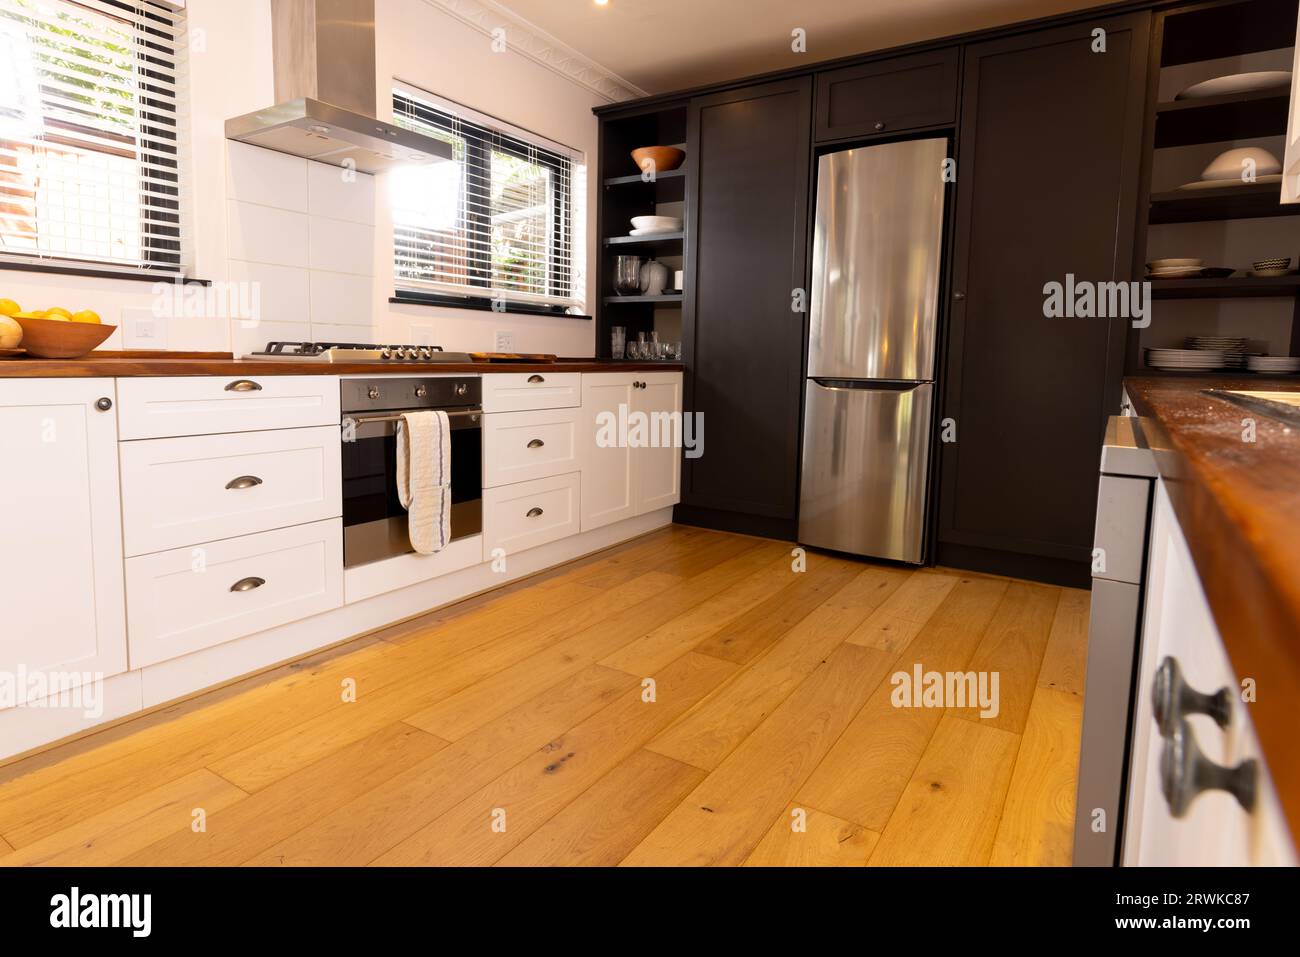 Spacious, modern kitchen with household appliances and wooden floor Stock Photo